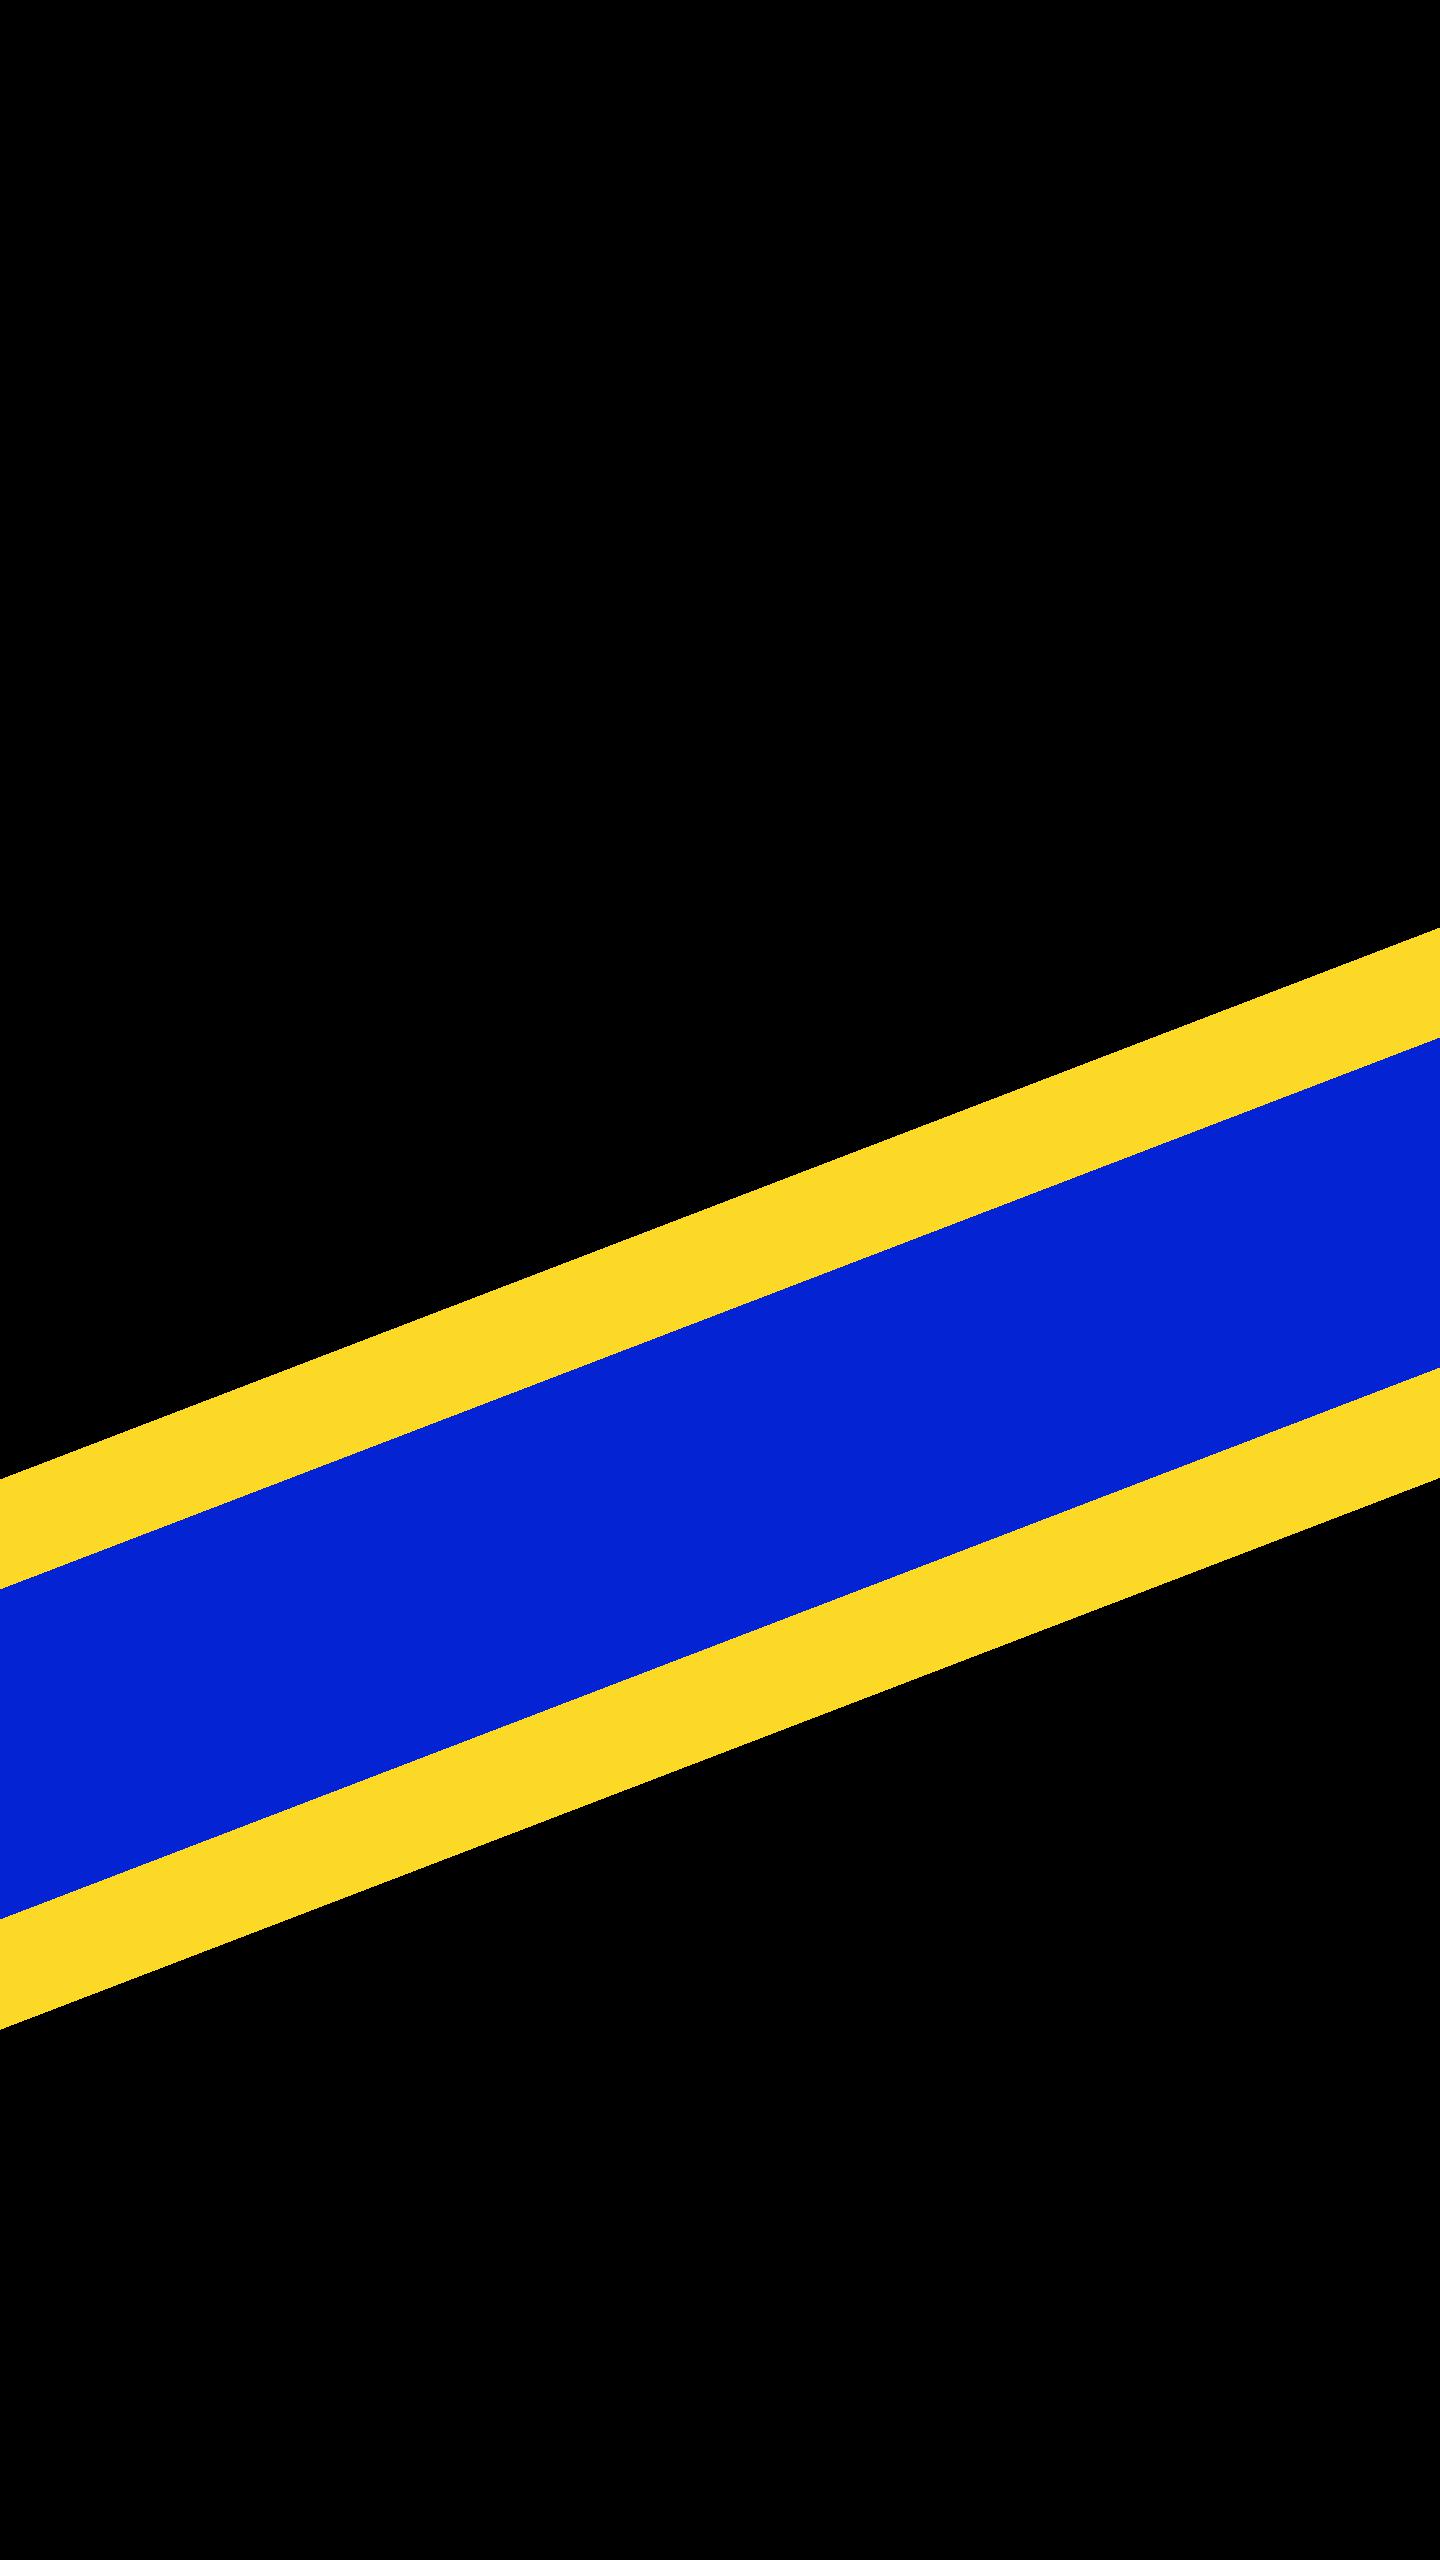 A black wallpaper with yellow, blue, yellow stripes. The blue stripe is three times the width of the yellow.